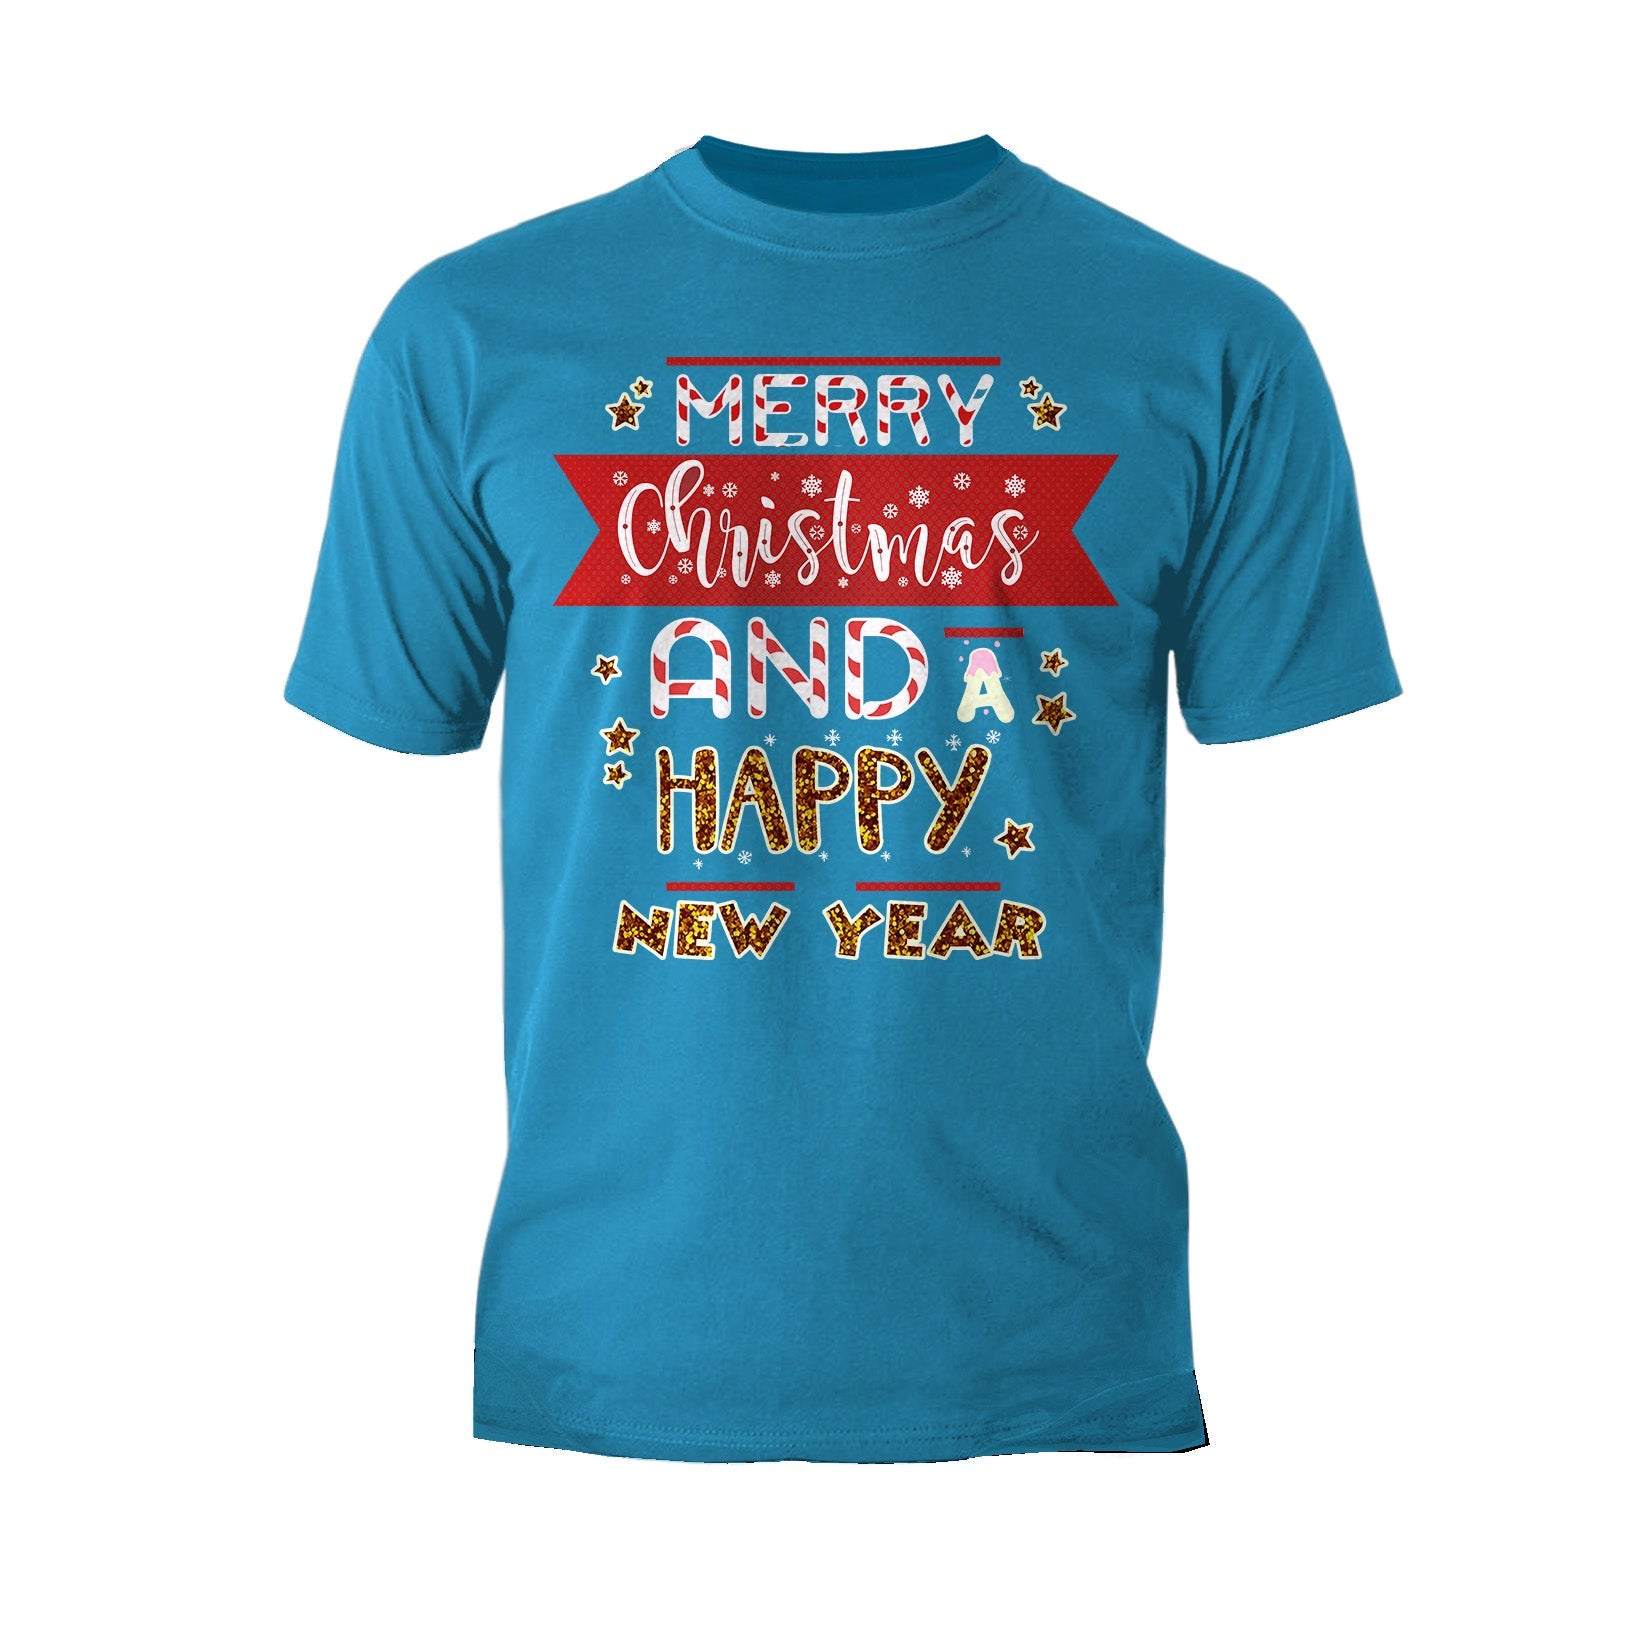 NYE Merry Christmas Stripes Happy New Year Sparkle Party Men's T-Shirt